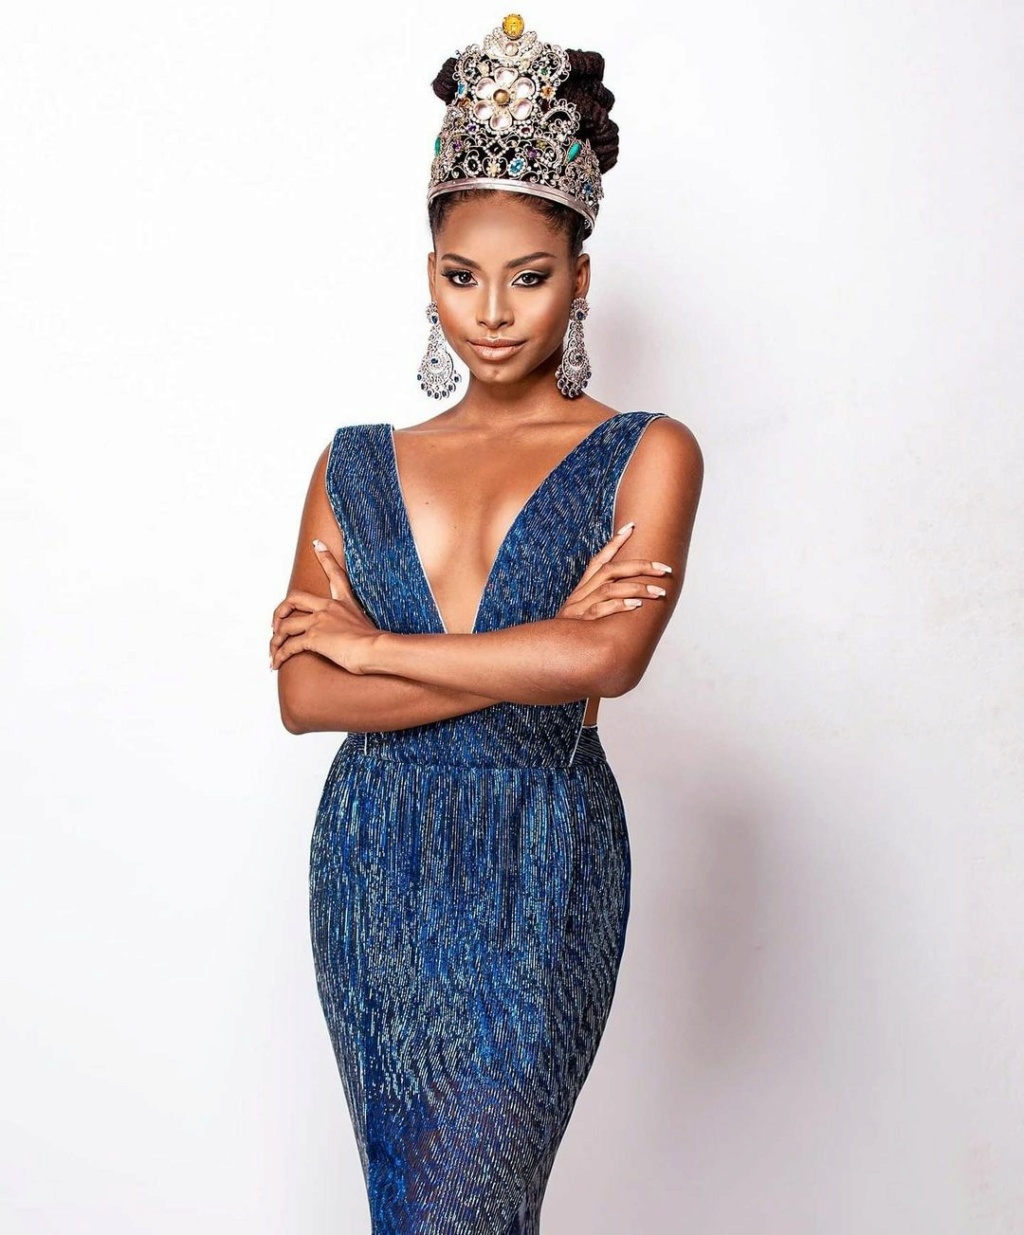 The Official Thread of MISS EARTH 2021: Destiny Wagner of Belize! - Page 2 27179410